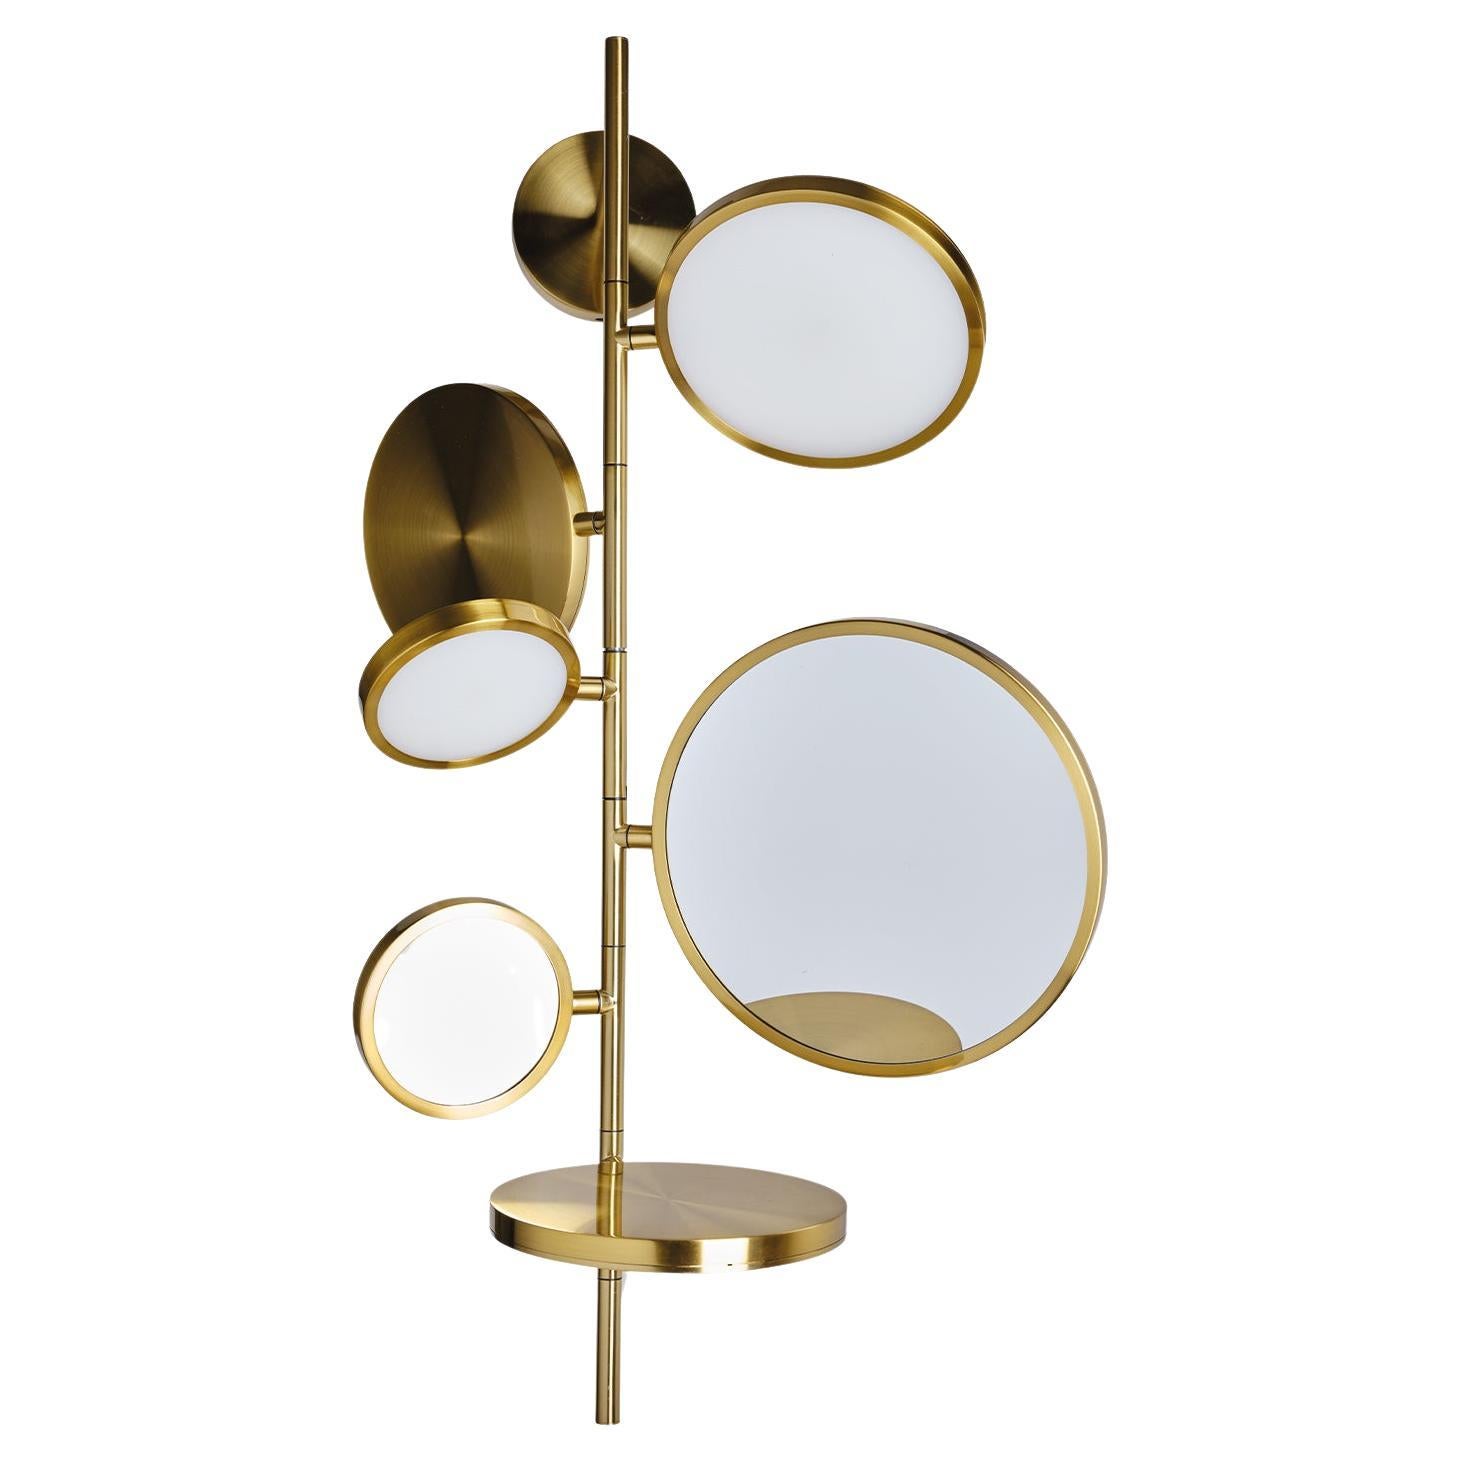 DCW Editions Tell Me Stories Mirror Light in Gold by Giulia Liverani For Sale